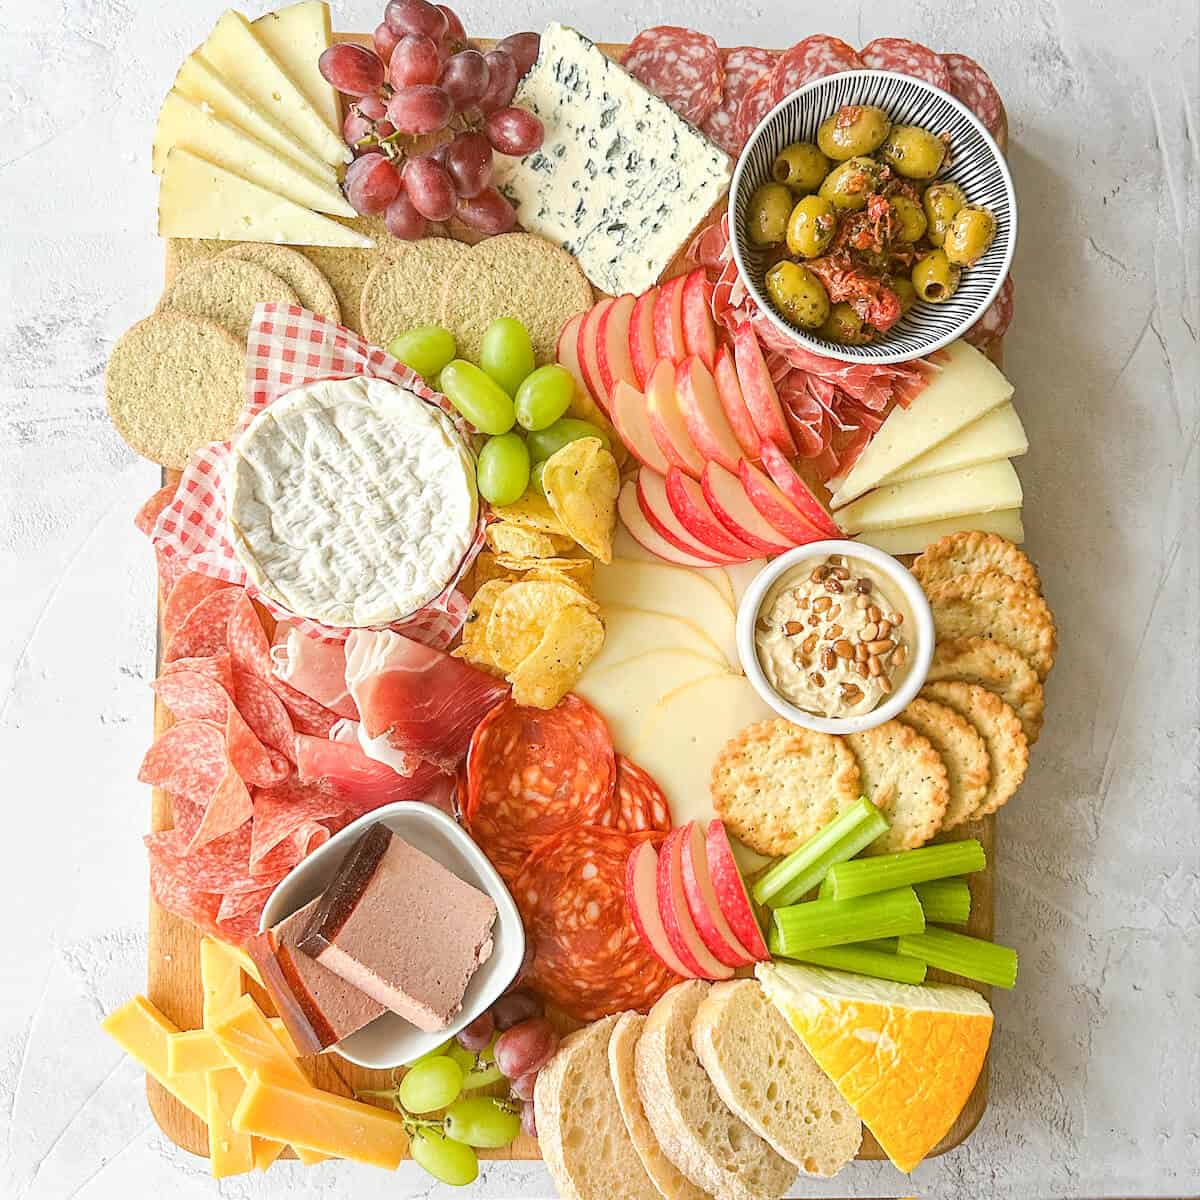 A grazing board with cured meats, cheeses, crackers, grapes, apples, olives, pate, bread and hummus.  